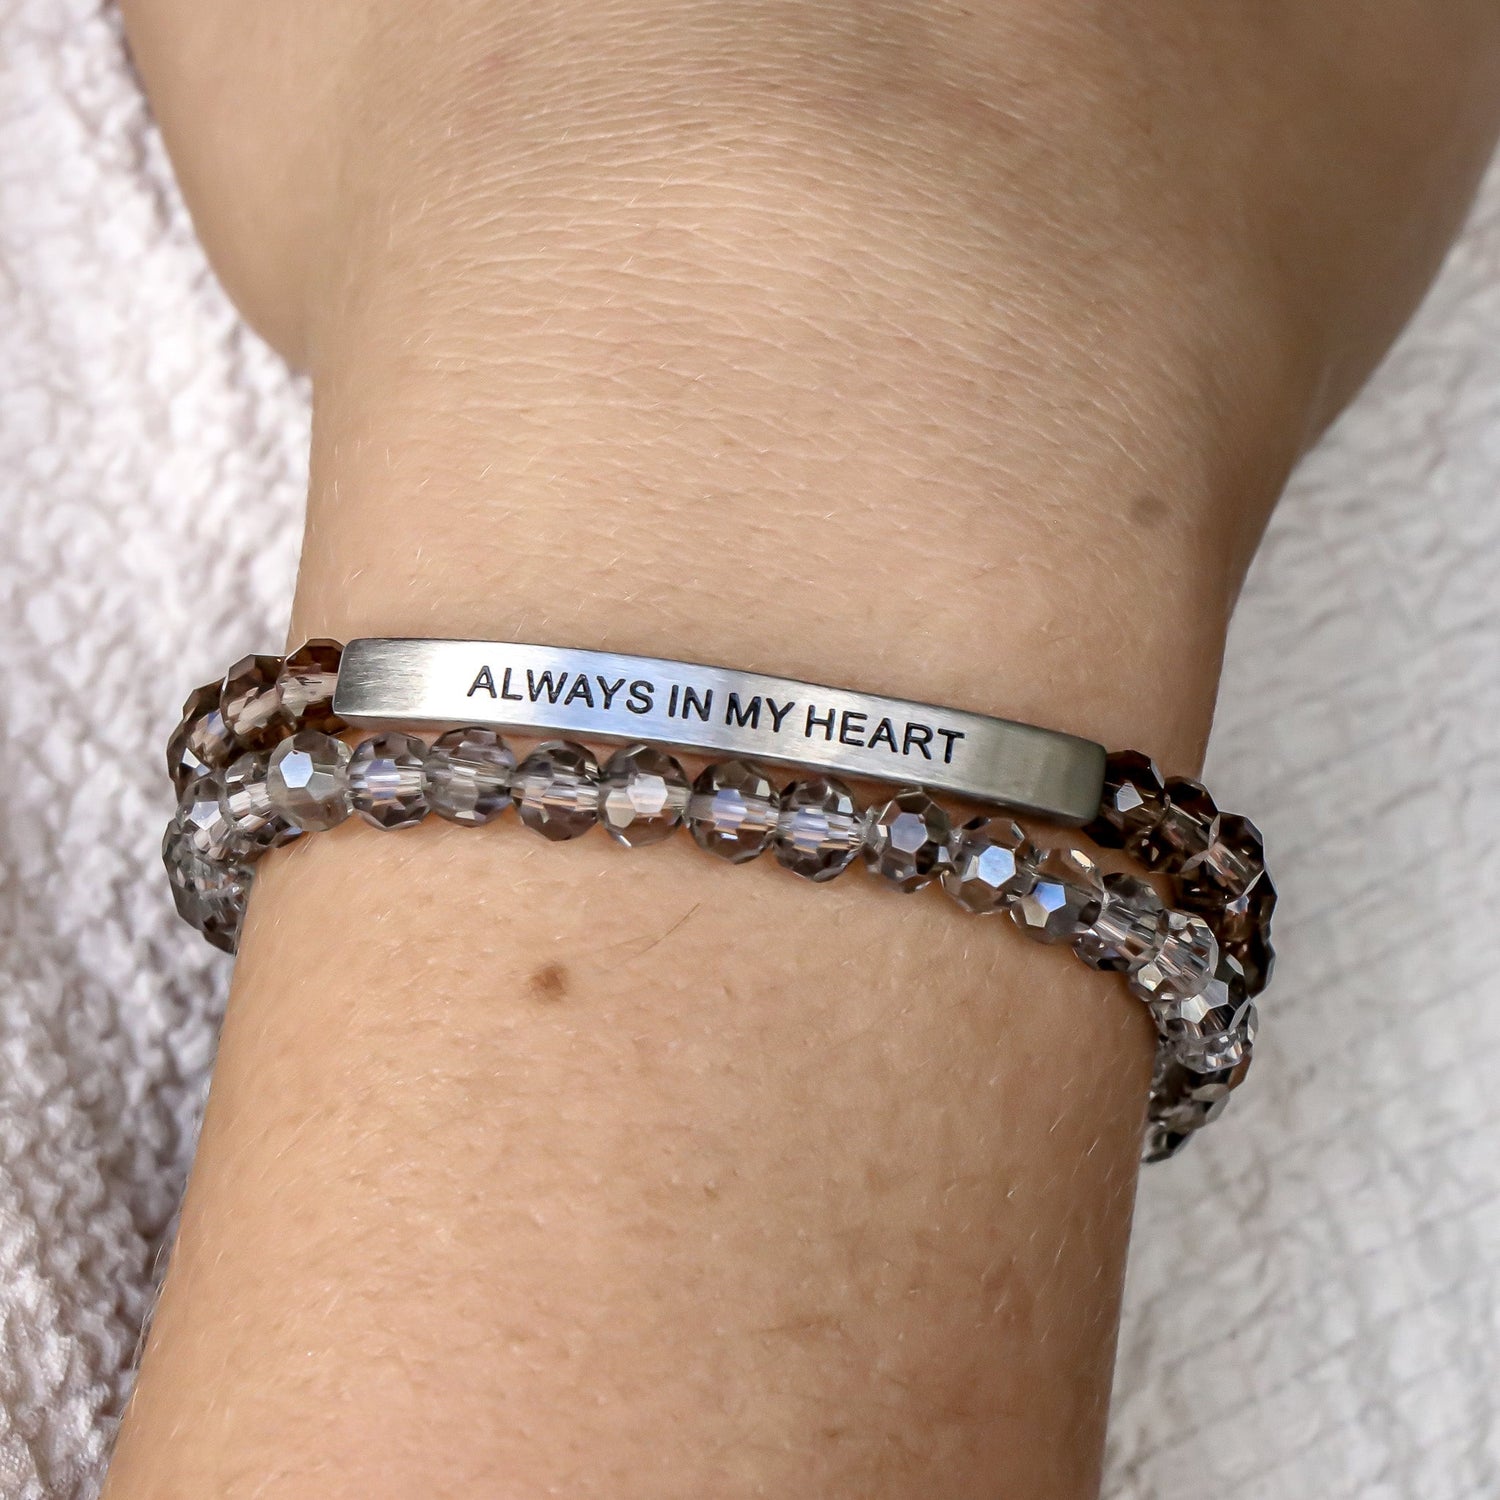 ALWAYS IN MY HEART - Inspiration Co.